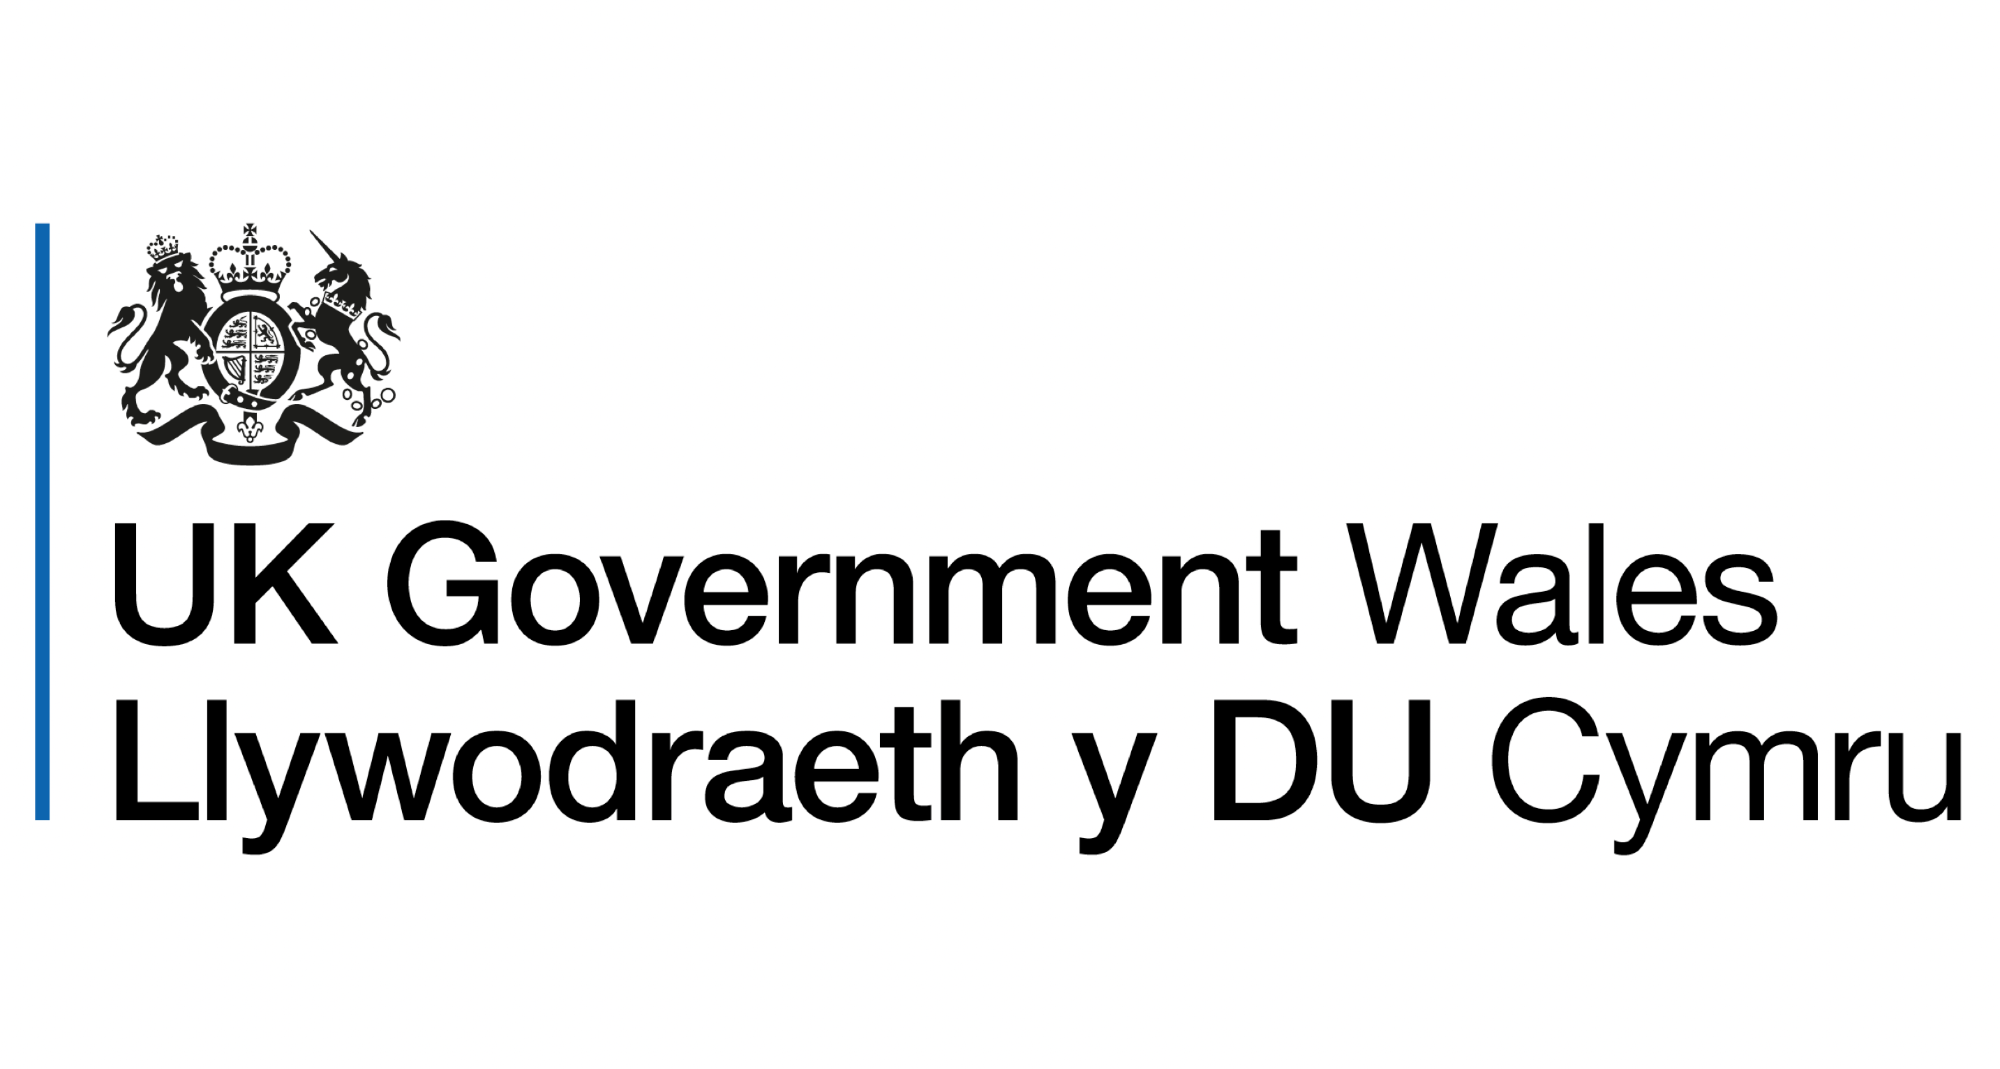 UK Government Wales